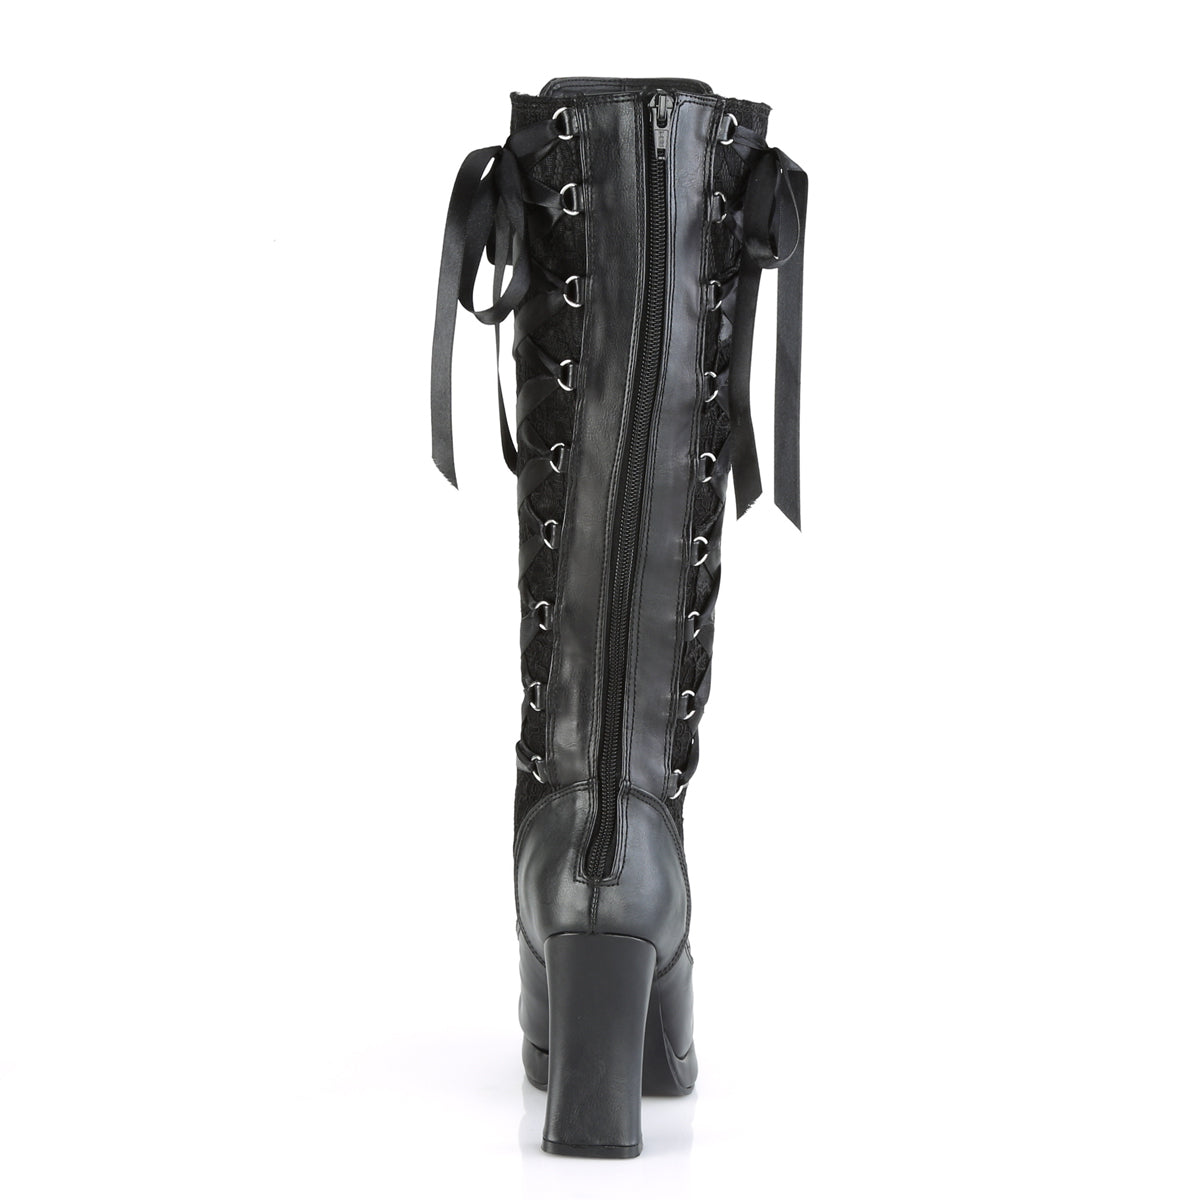 DemoniaCult Womens Boots CRYPTO-106 Blk Vegan Leather-Lace